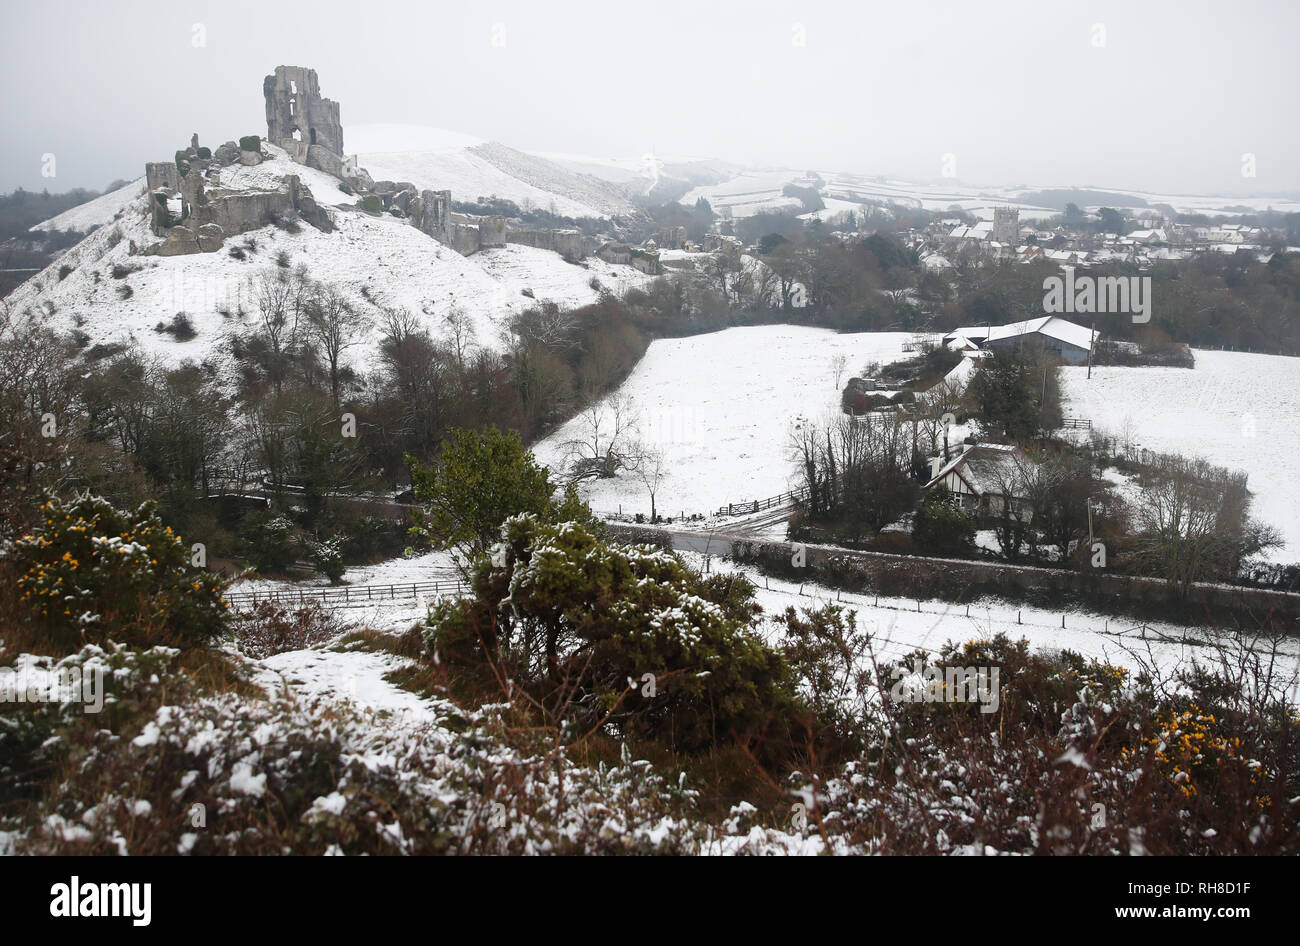 Snow covers the ground around Corfe Castle in Dorset. Snowfall and icy conditions are expected to cause widespread travel disruption after temperatures plummeted as low as minus 15.4C (4.3F) overnight. Stock Photo